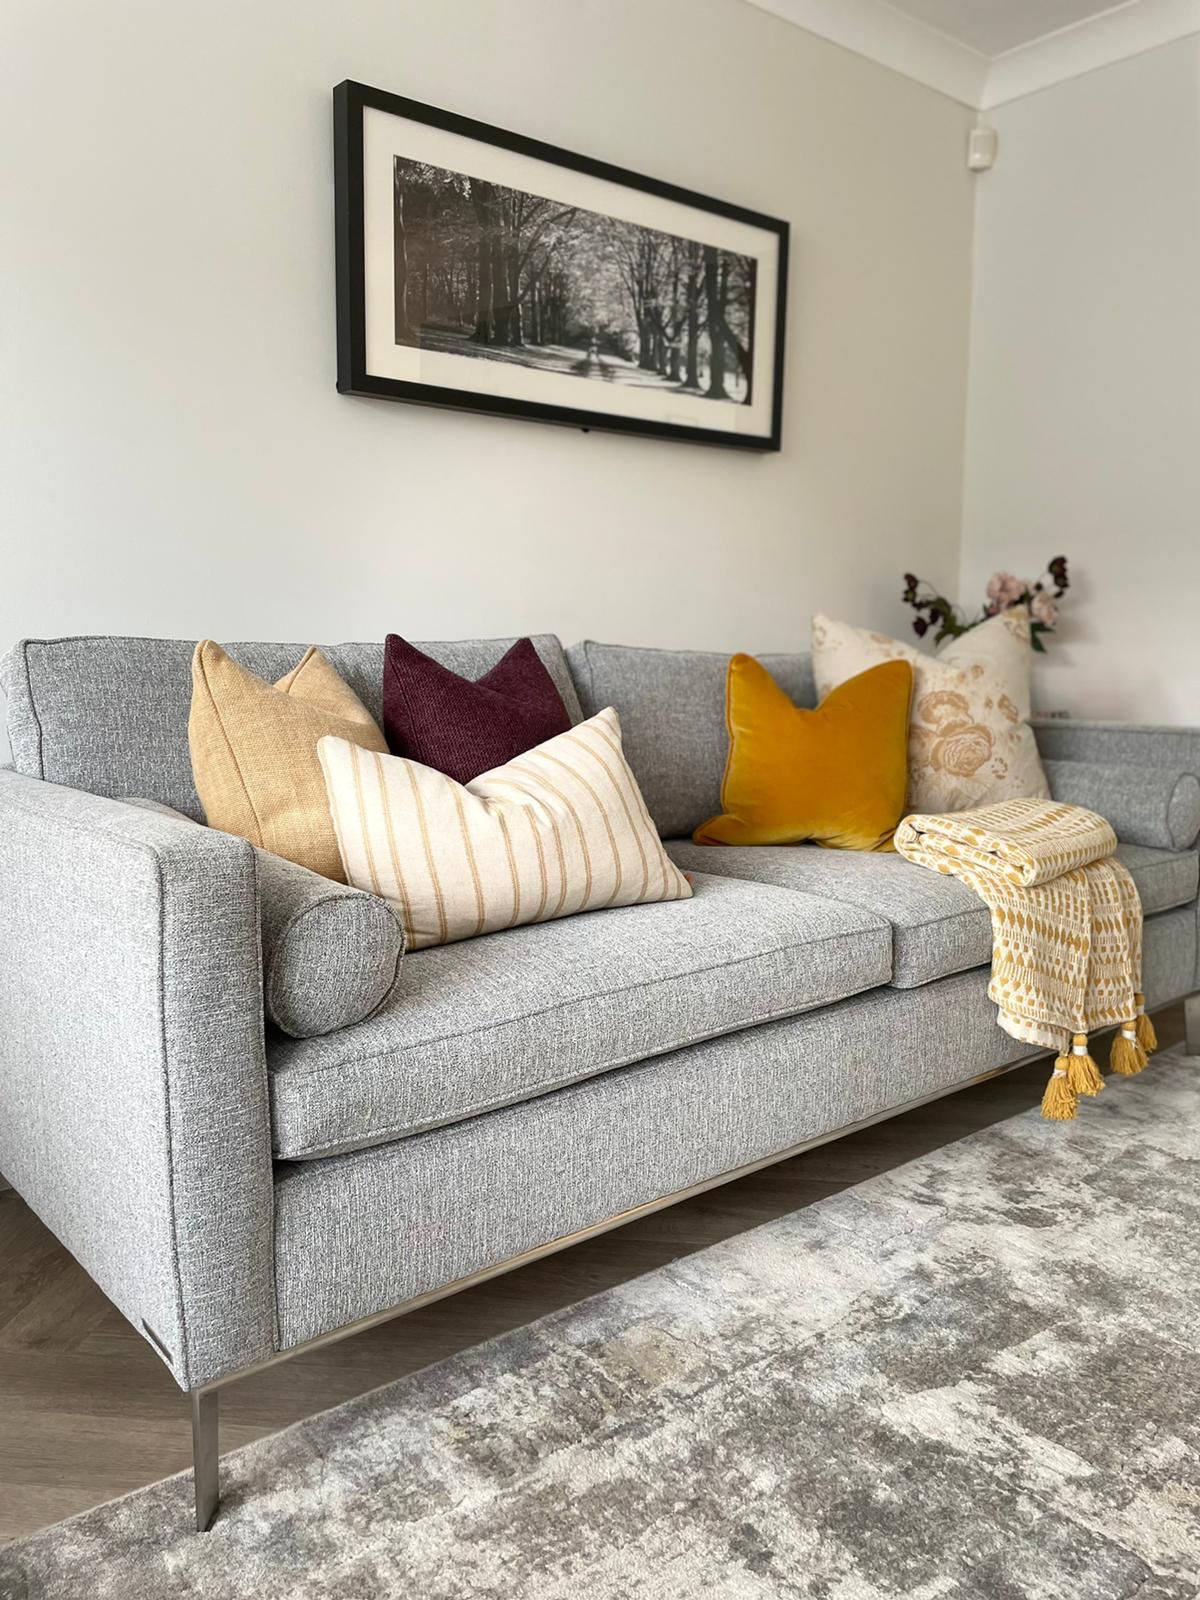 Bespoke Home Design and Interiors Service at Hunters Furniture Derby